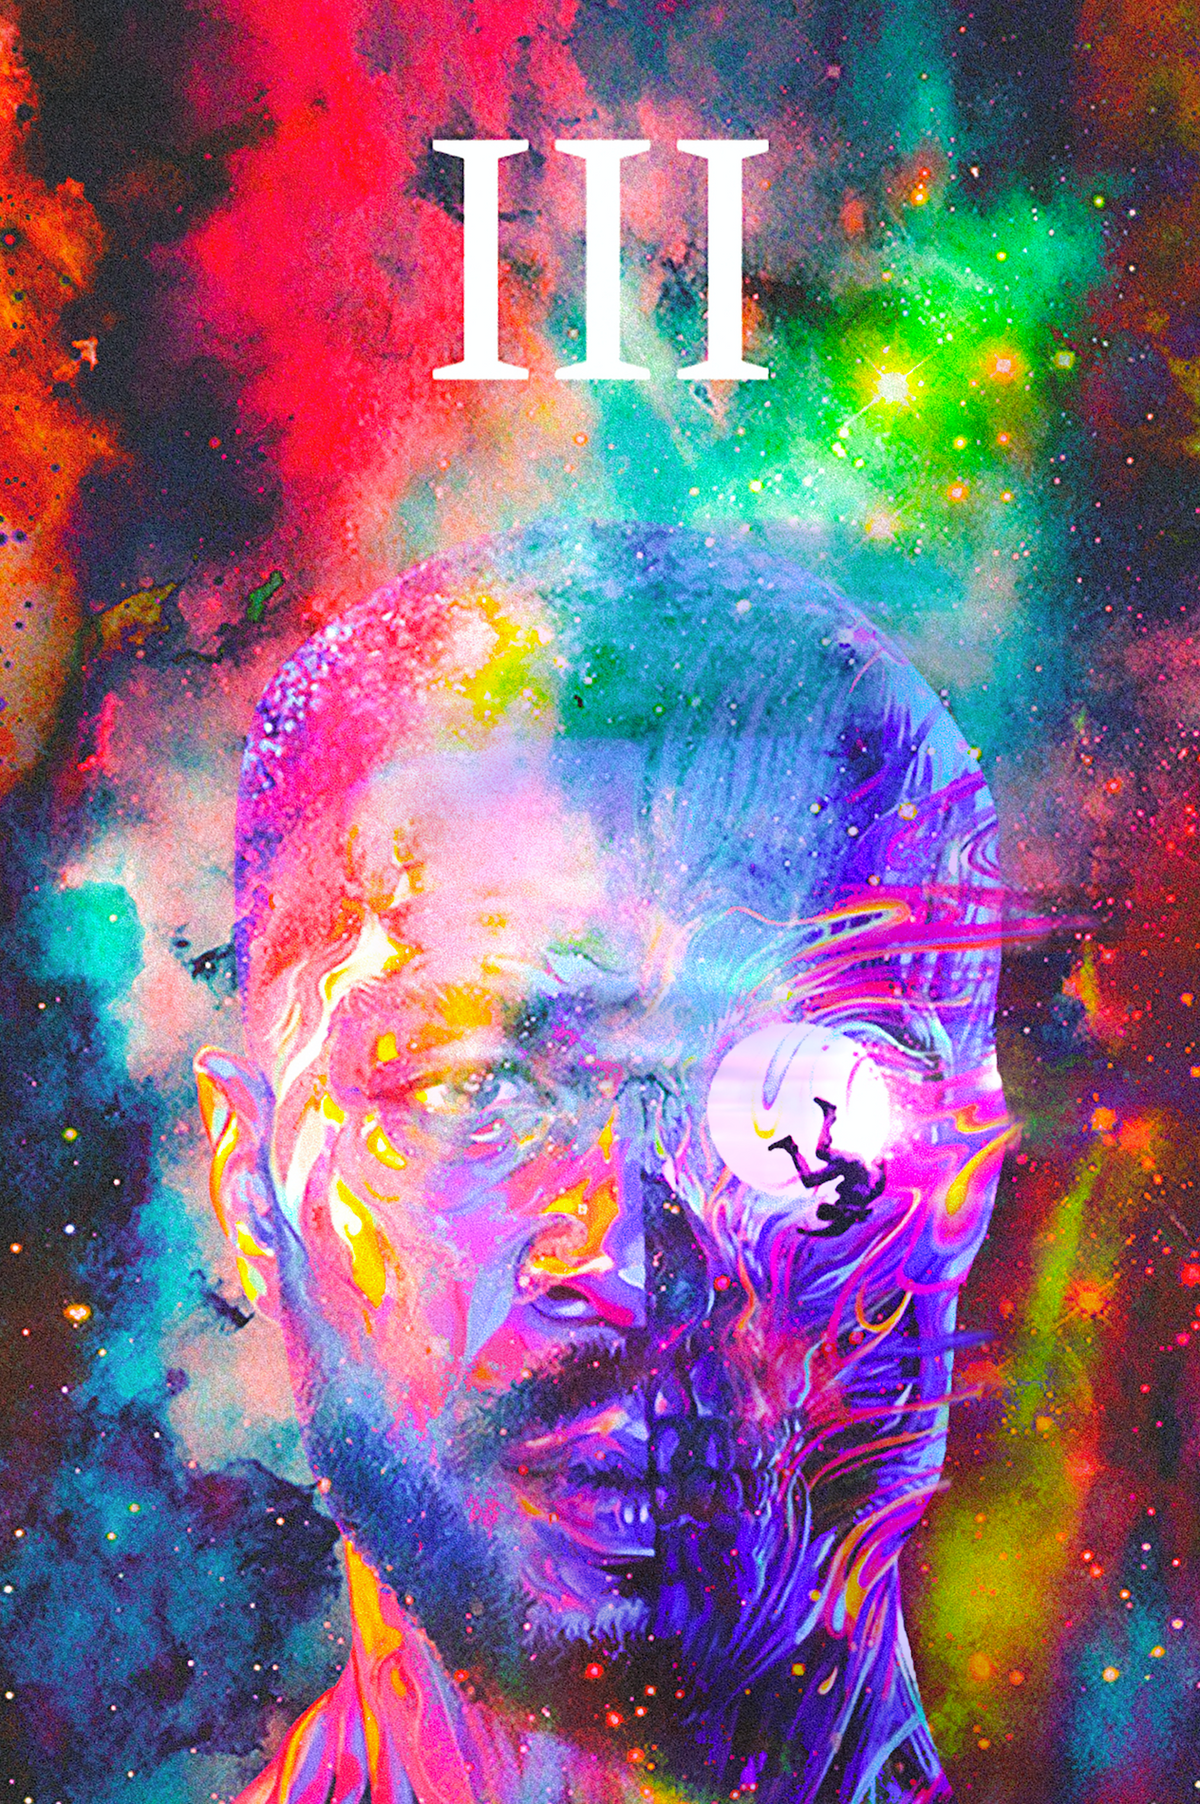 Kid Cudi Man On The Moon 3 Psychedelic Poster by Sorrxnto